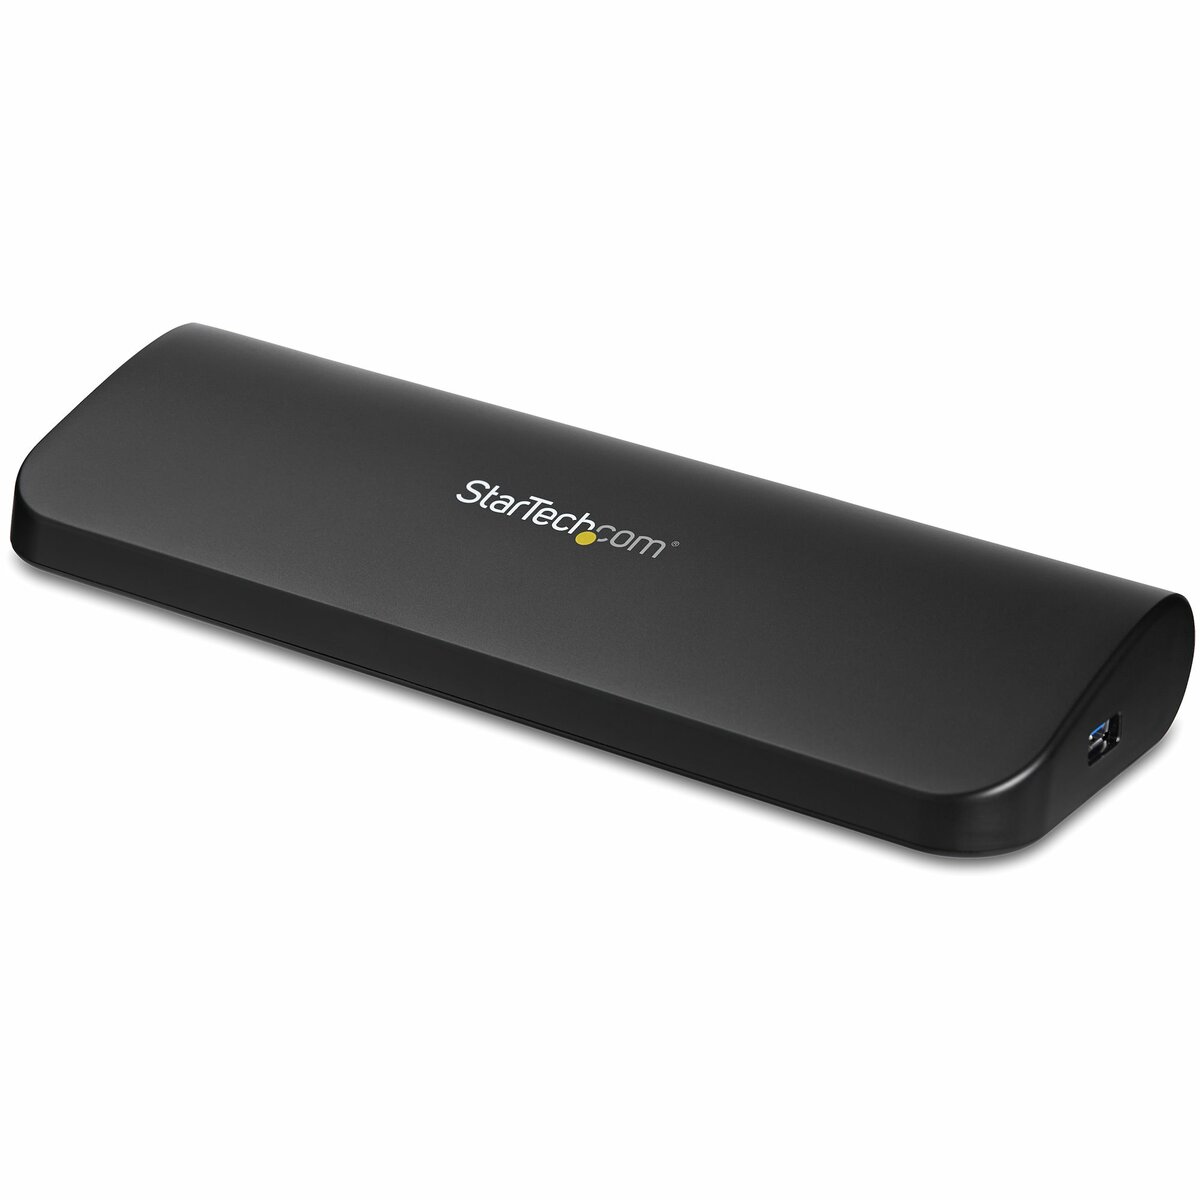 STATION D'ACCUEUIL STARTECH multiport - USB Type-C HDMI / VGA/RJ45